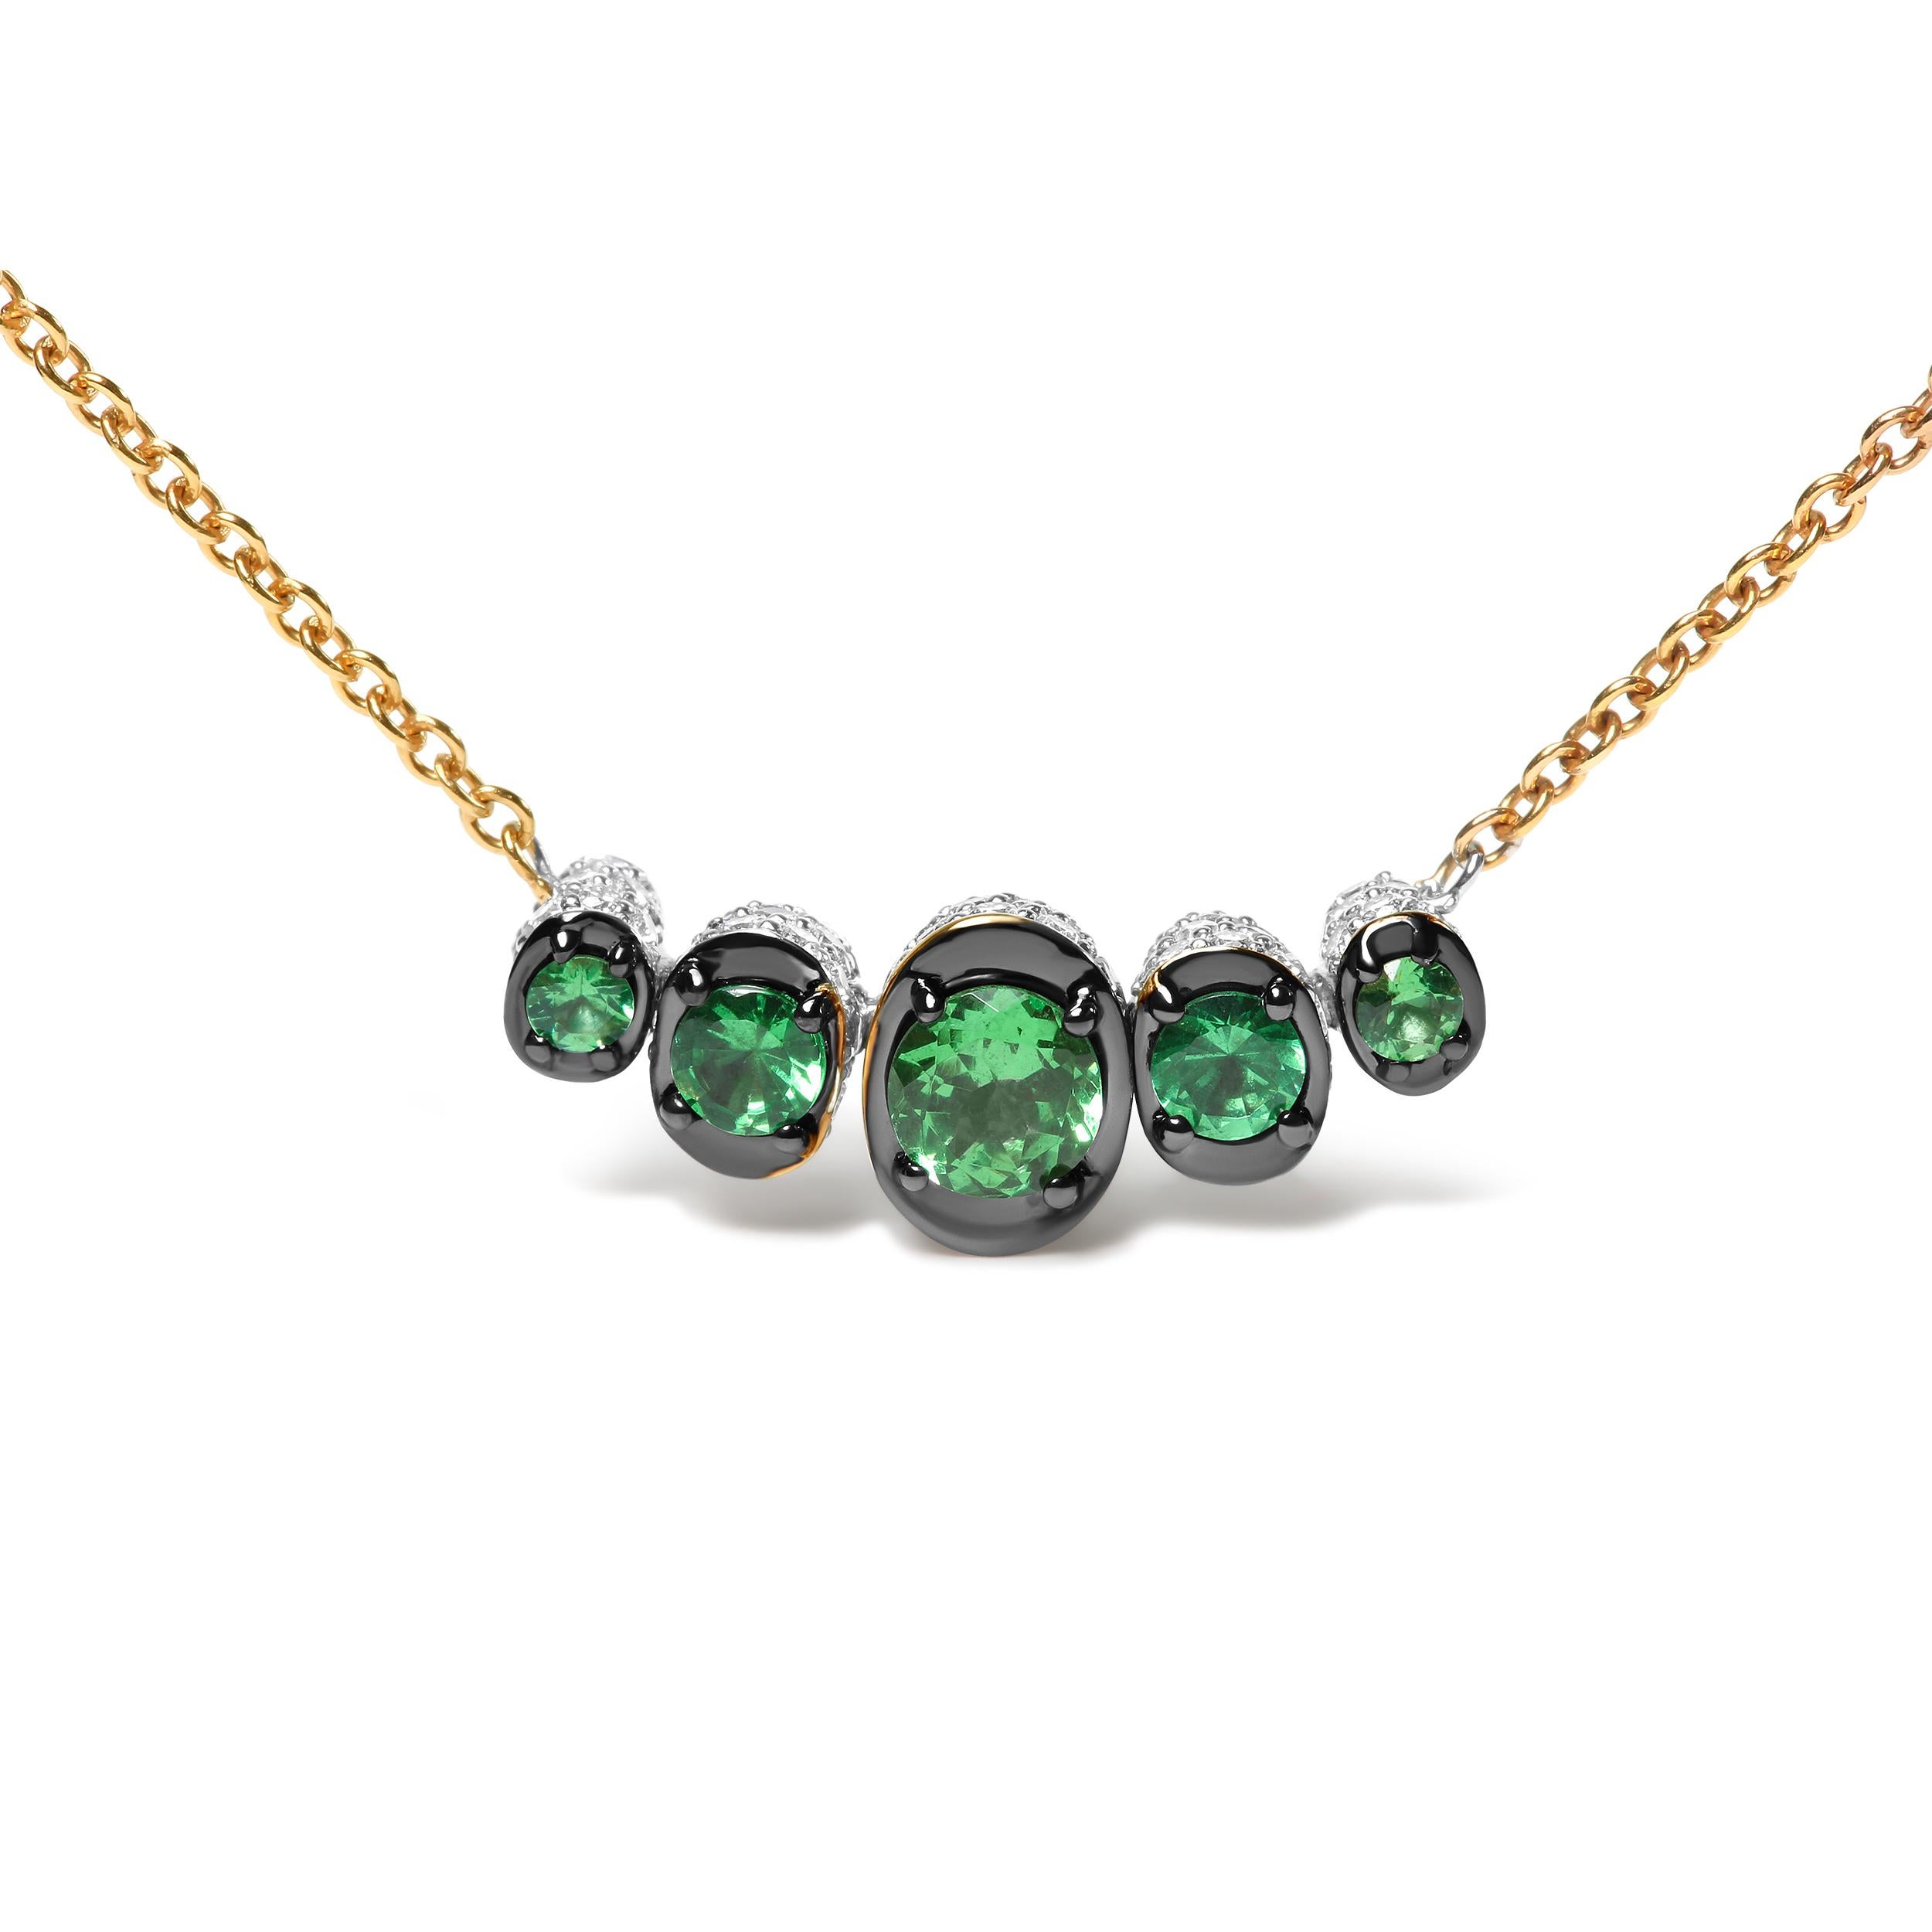 Complement your stylish taste with this beautiful diamond and gemstone choker necklace. This fashion necklace graduates round heat-treated green Tsavorite gemstones in 4mm, 3mm, and 2mm sizes on a curved bar of 18k rose gold. Within prong settings,